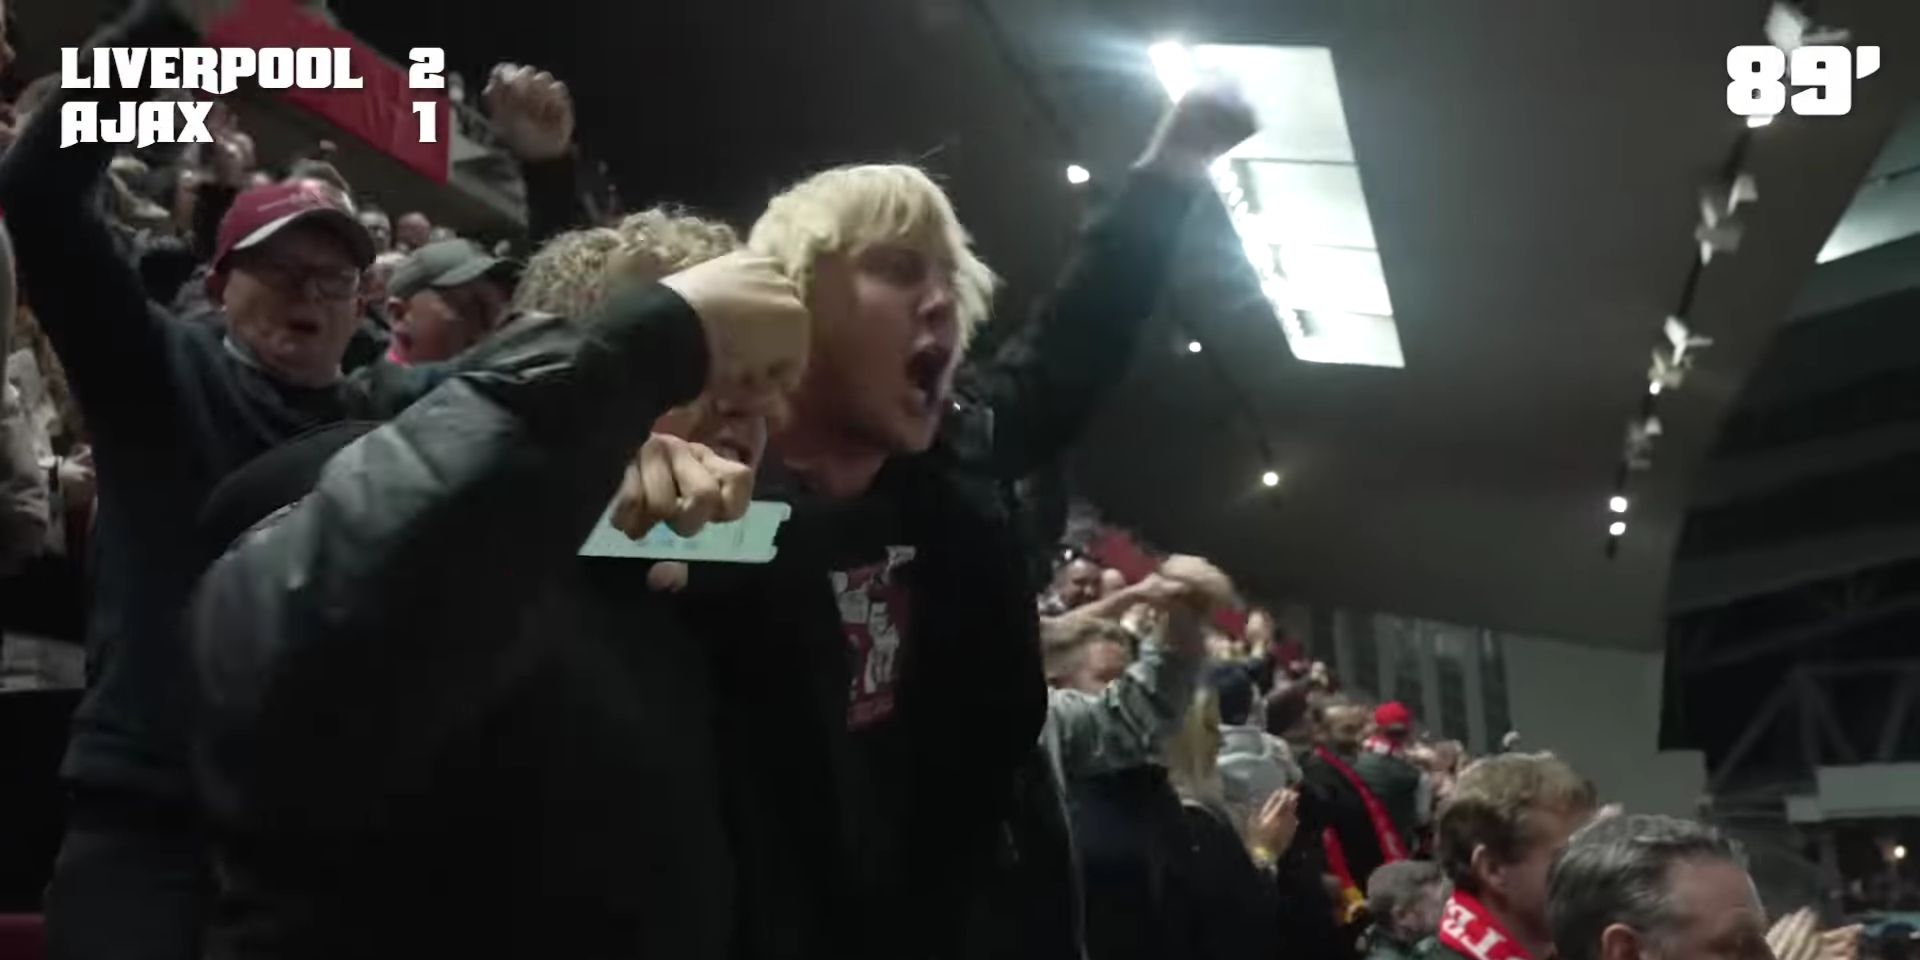 (Video) Paddy The Baddy shares matchday vlog from Ajax victory and wild celebrations after Matip’s goal